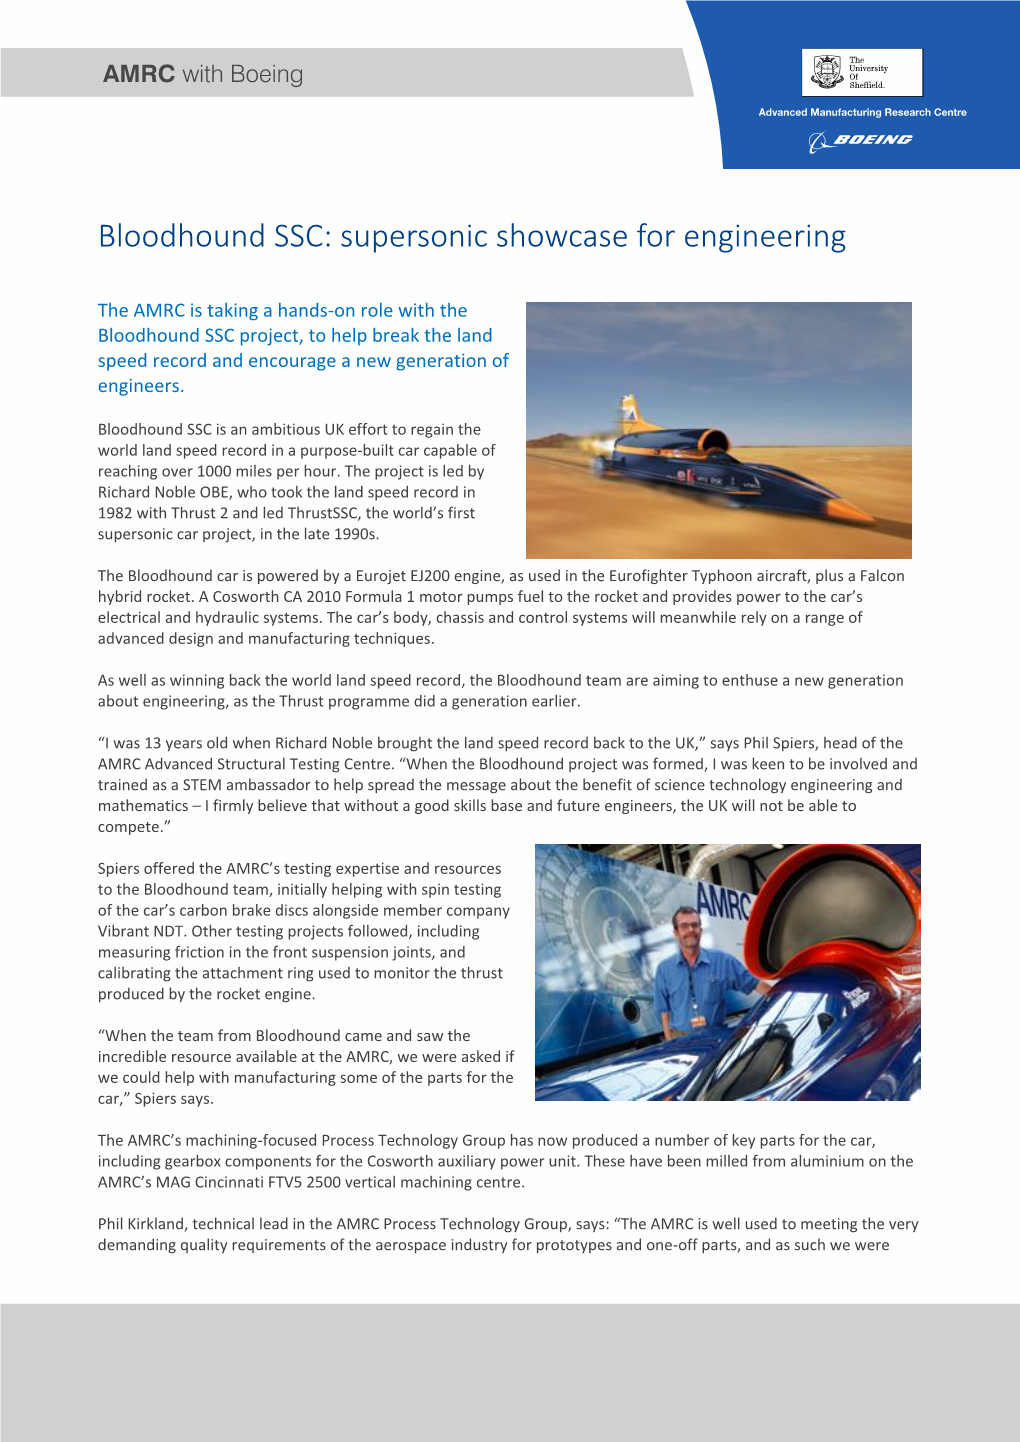 Bloodhound SSC: Supersonic Showcase for Engineering